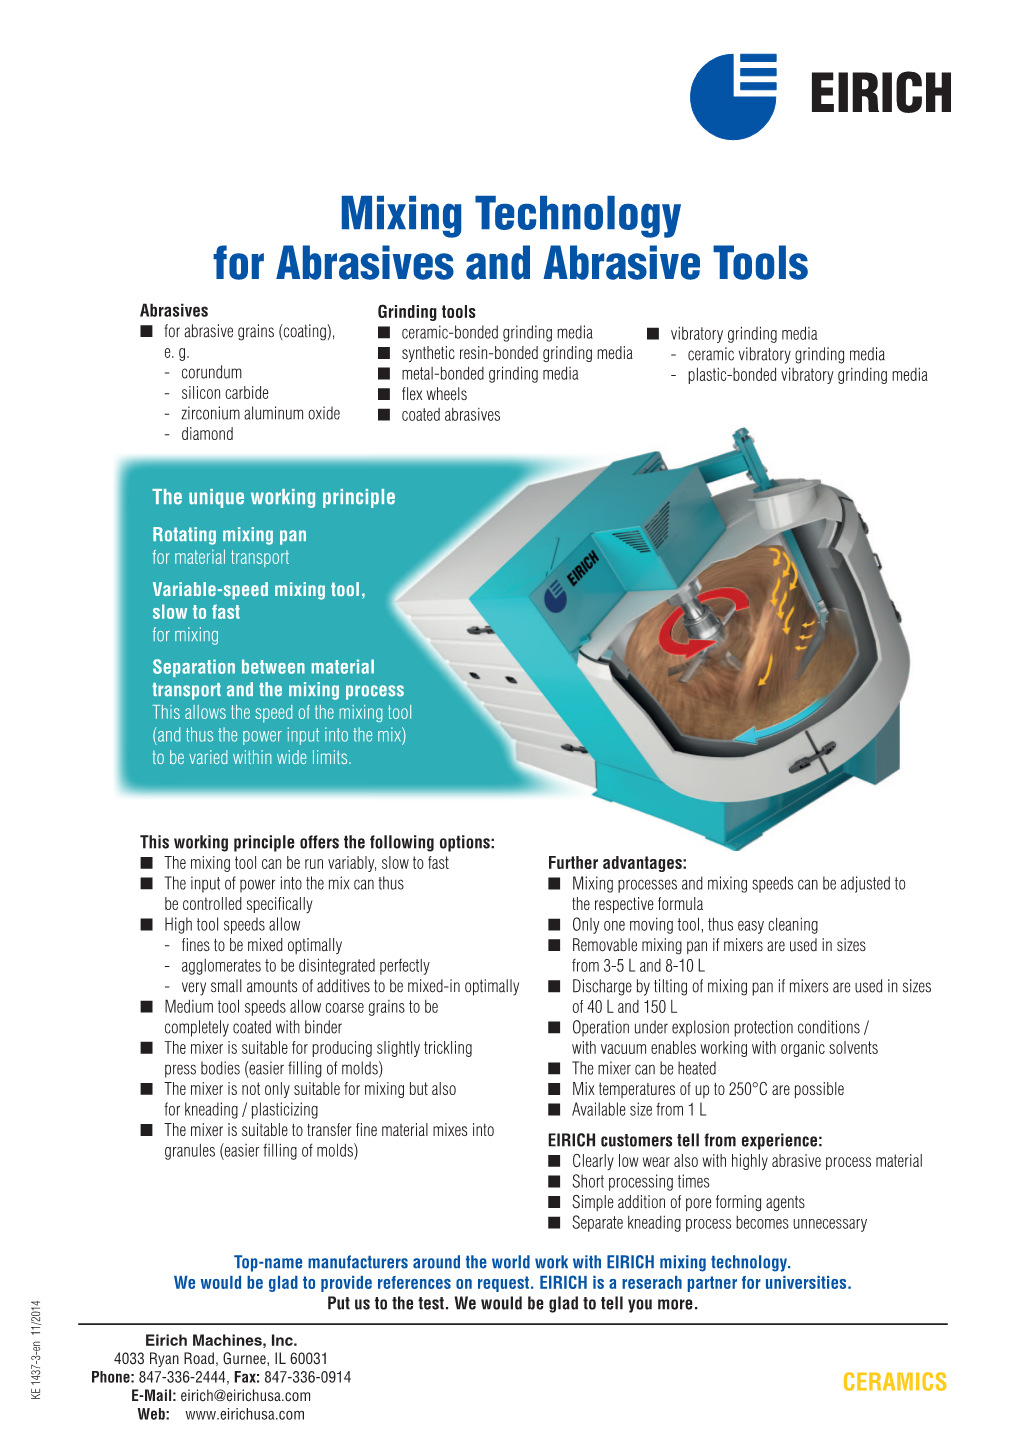 Mixing Technology for Abrasives and Abrasive Tools